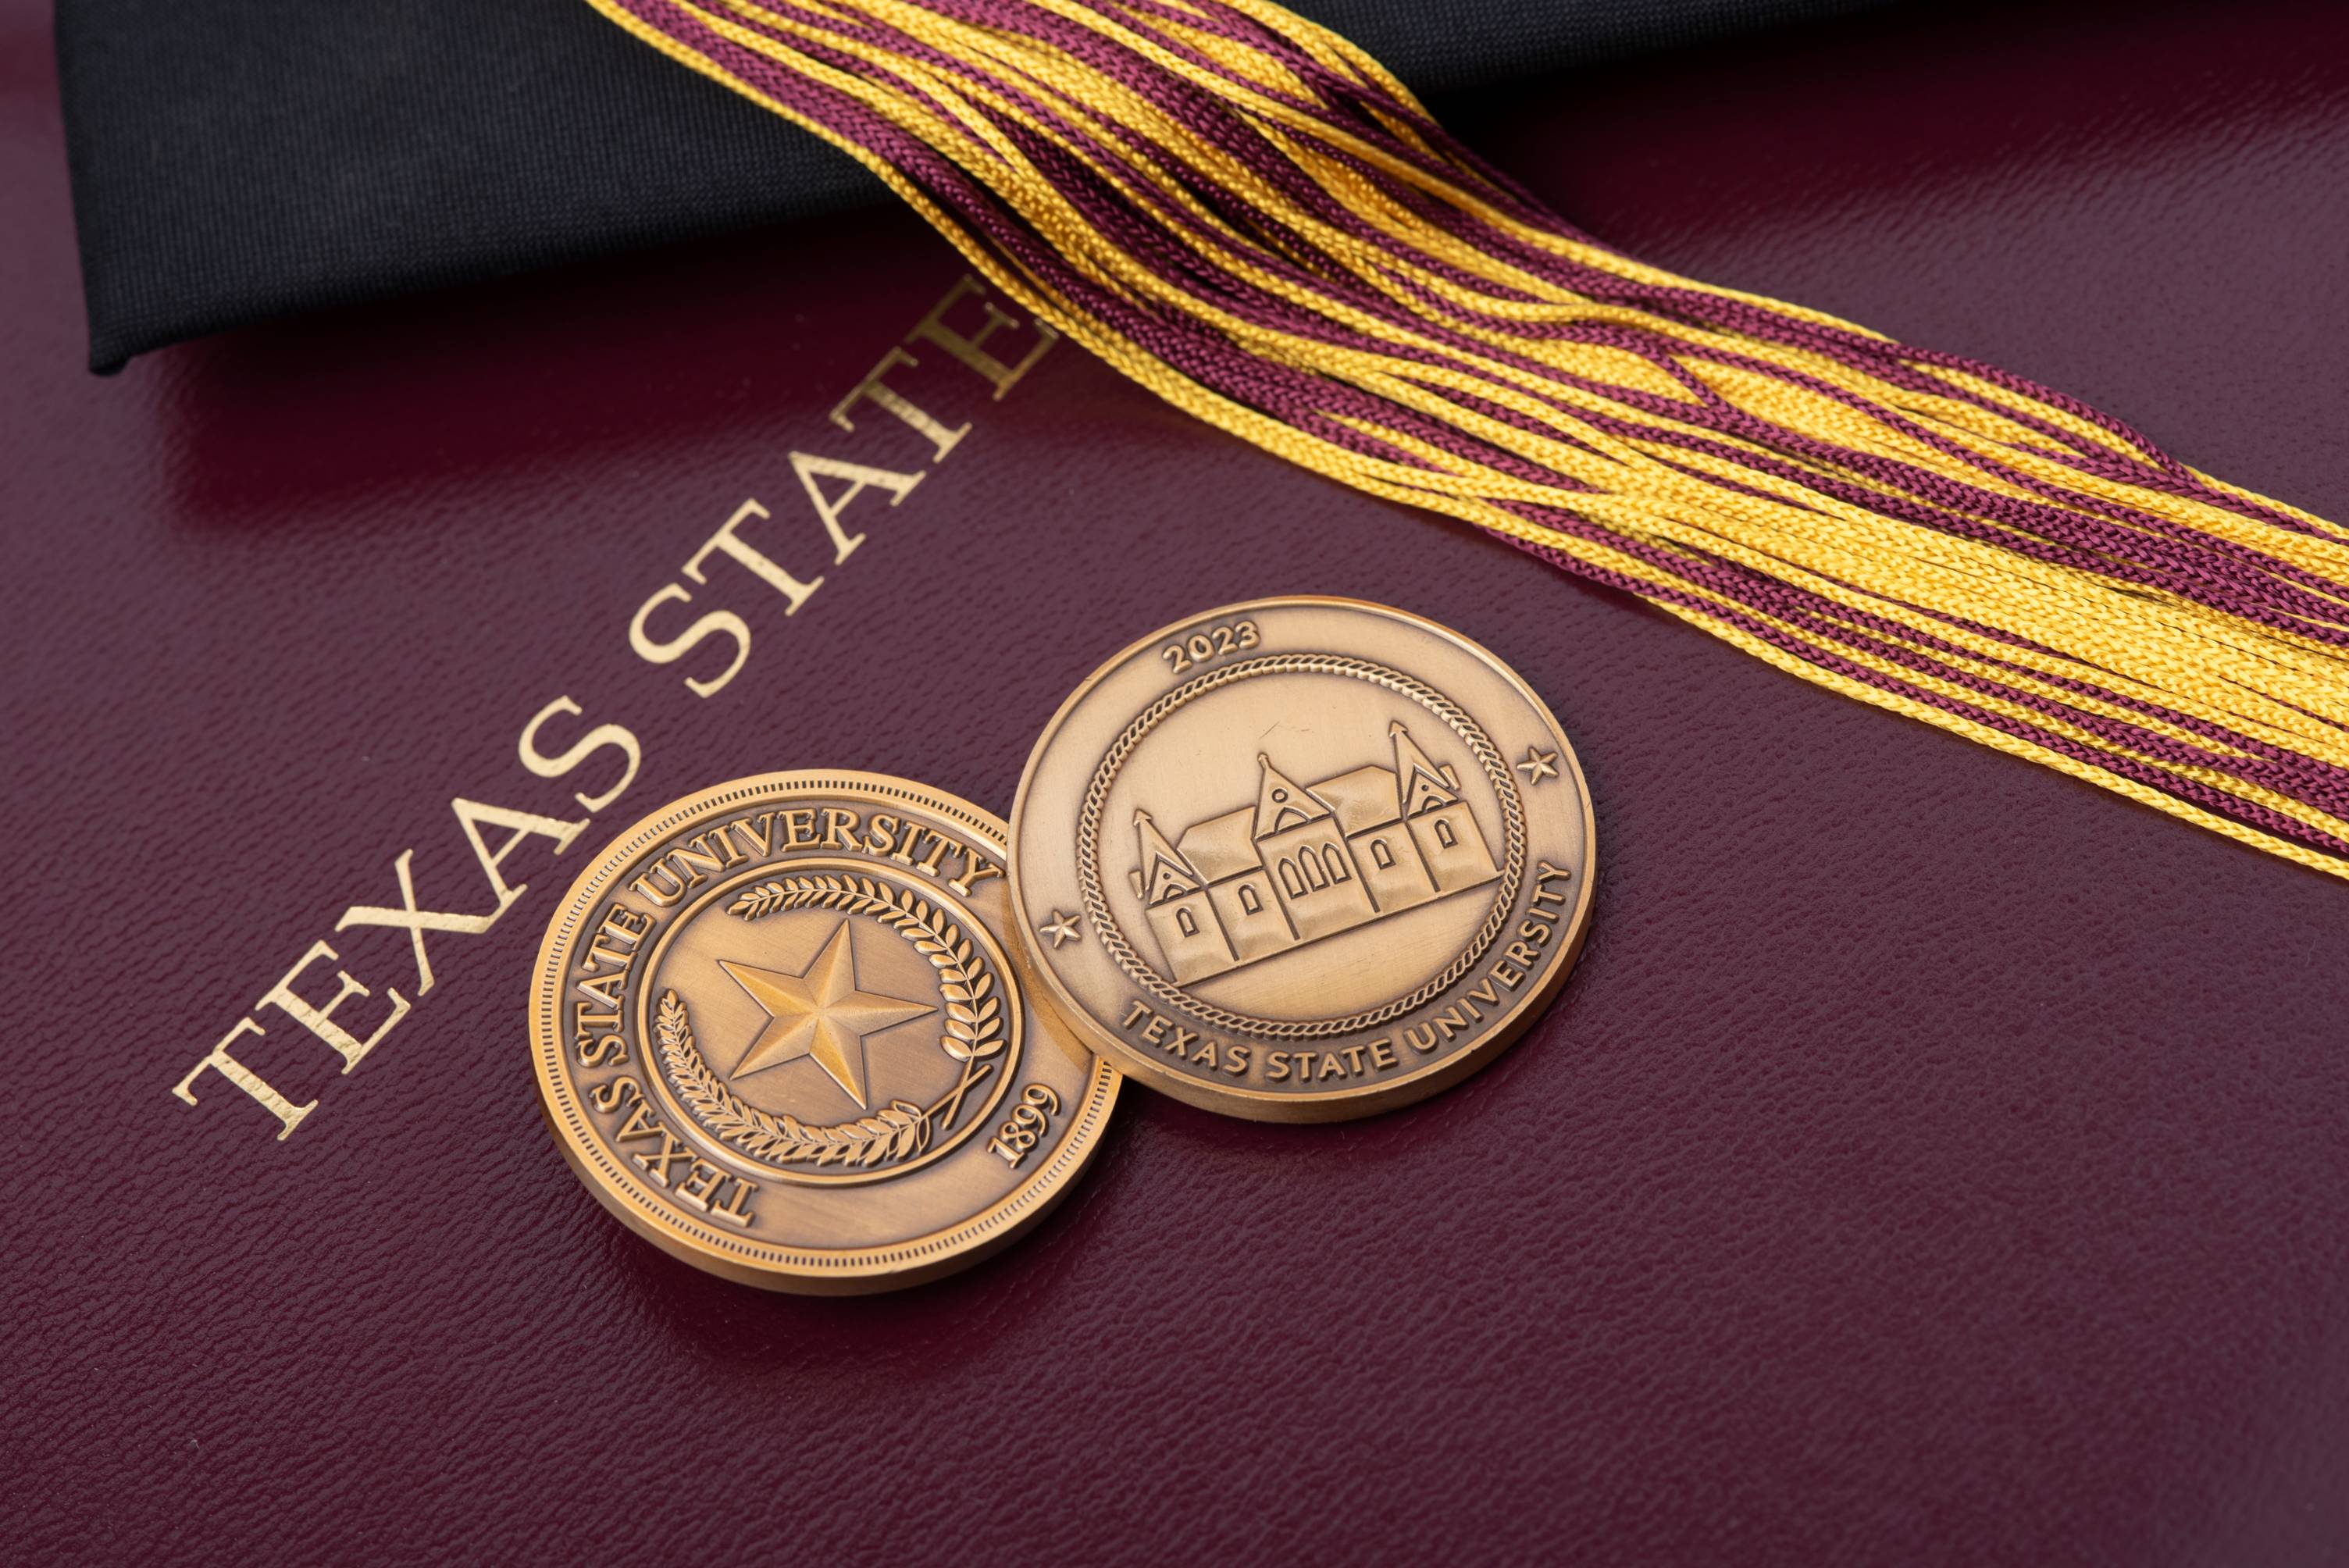 Texas State University challenge coins front and back on maroon diploma board